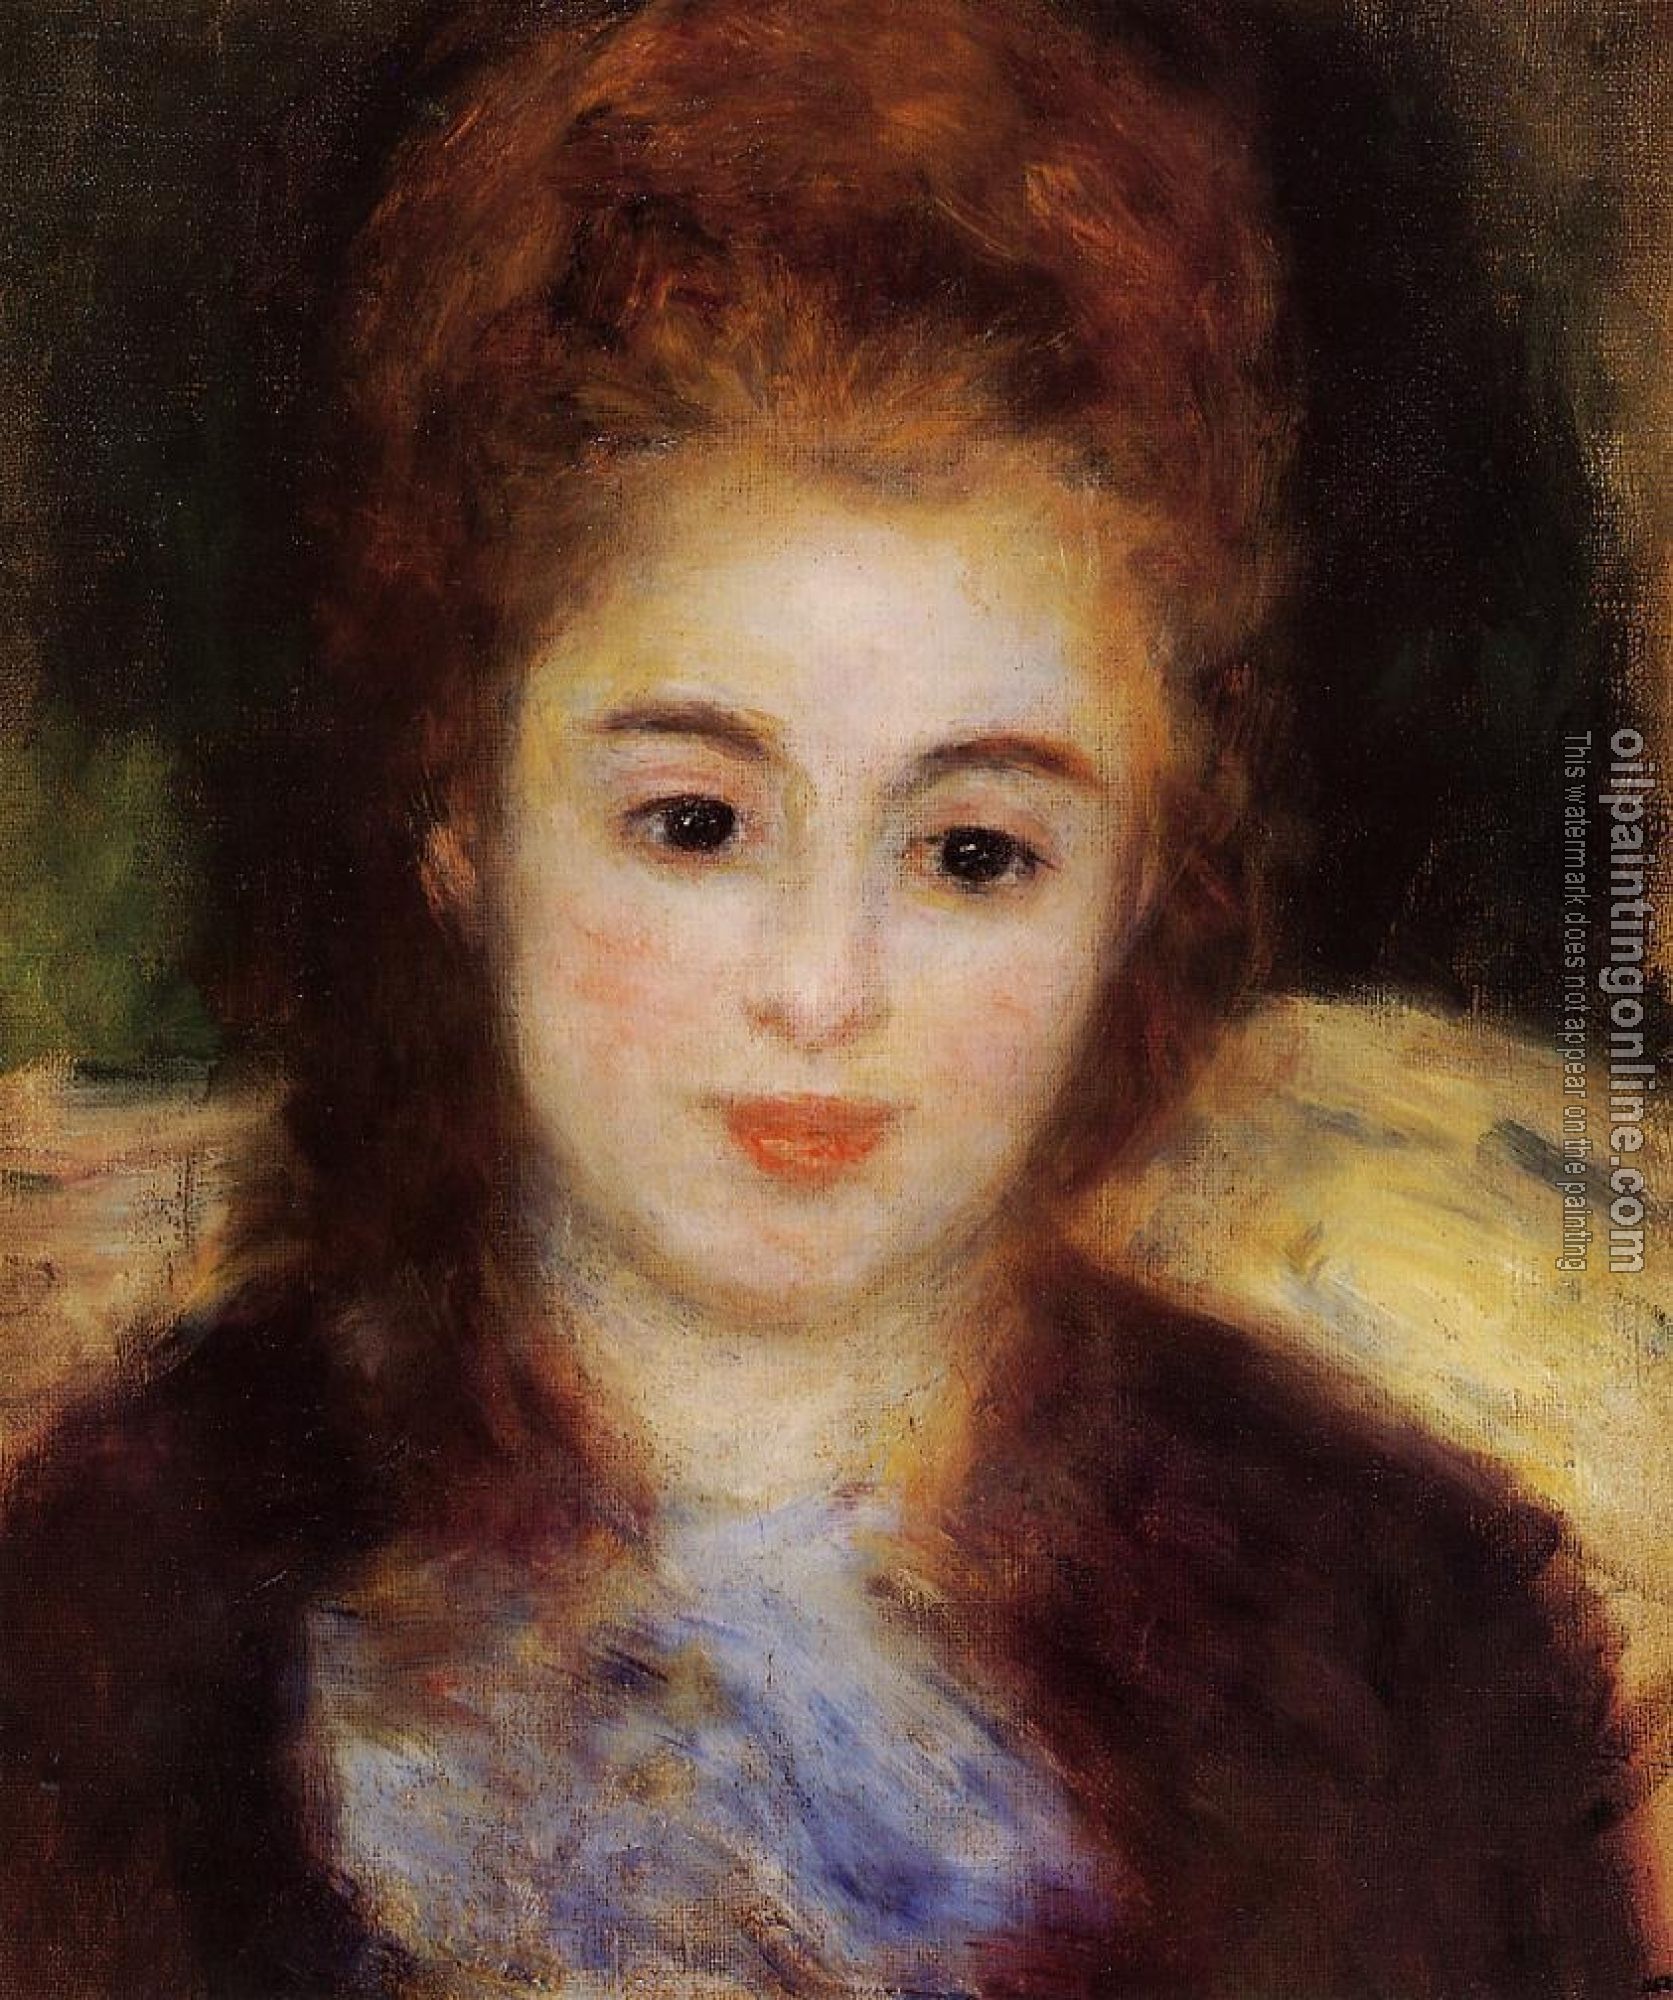 Renoir, Pierre Auguste - Head of a Young Woman Wearing a Blue Scarf, Madame Henriot